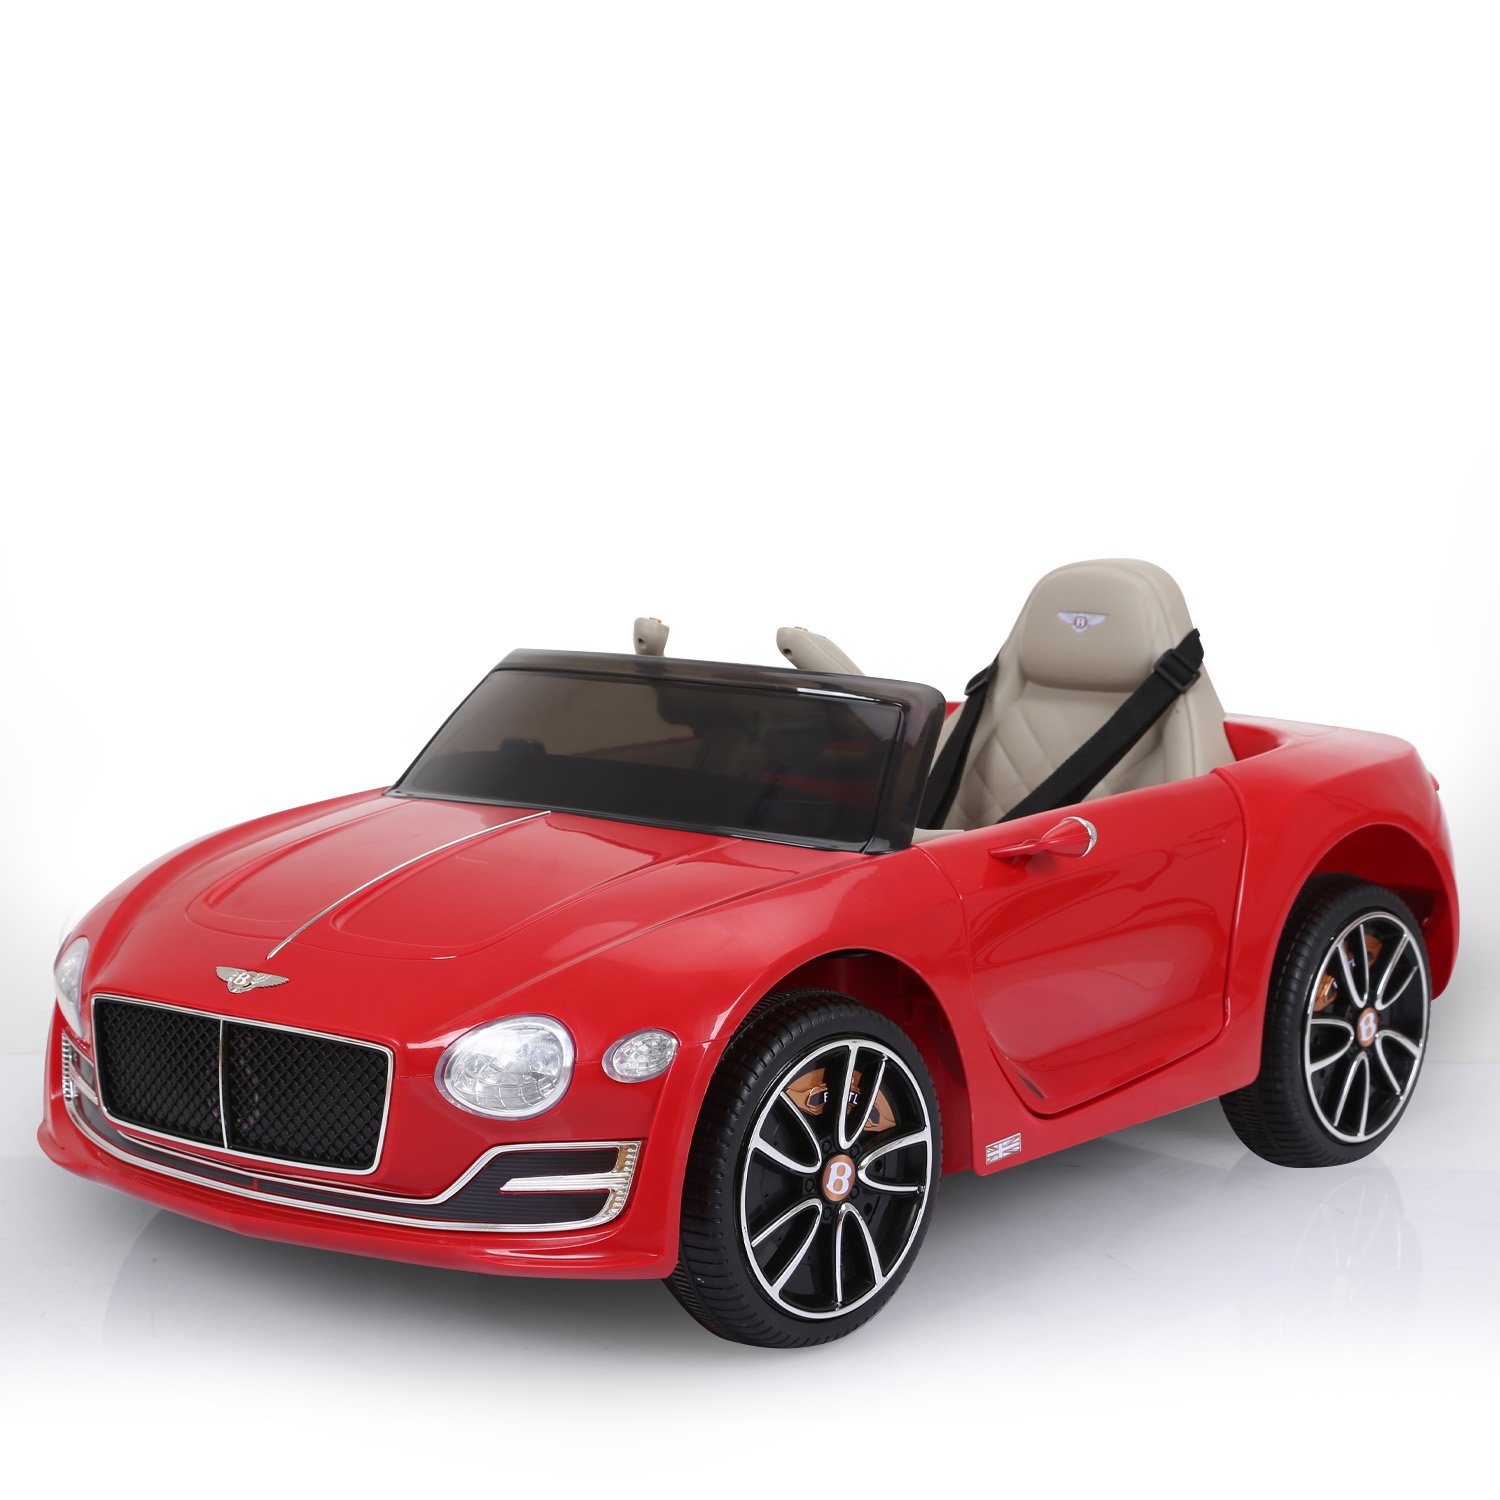 Bentley Exp 12 Speed 6E Licensed Kids Ride On Electric Car Remote Control - Red 1